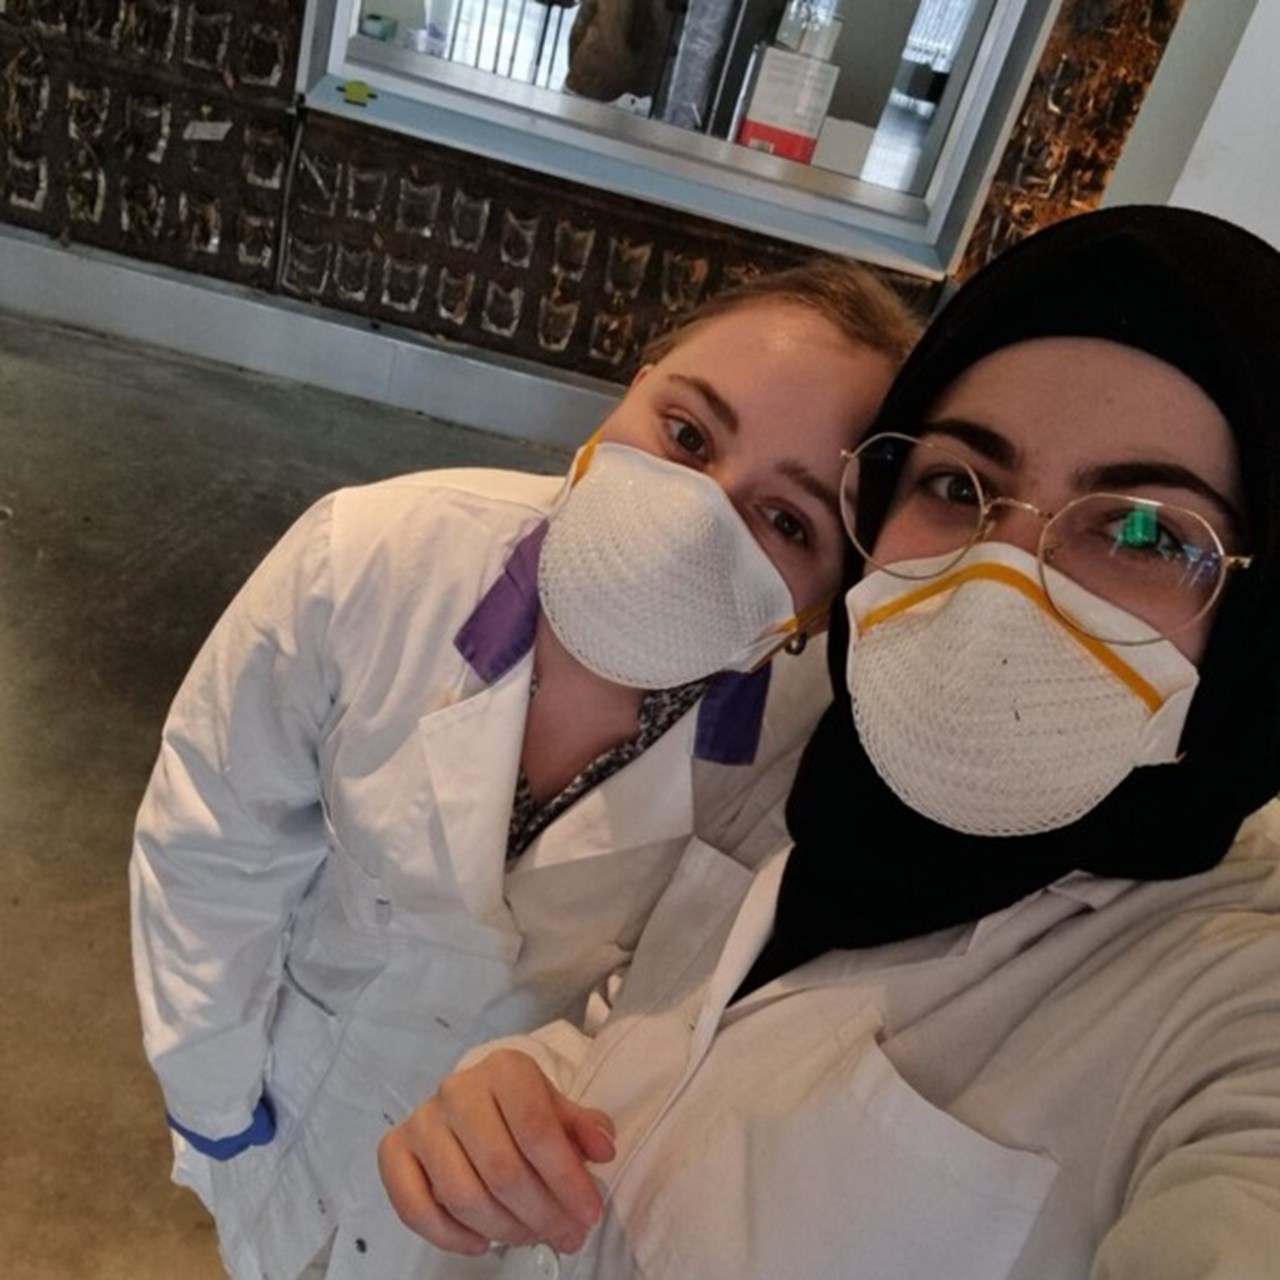 Hanna and Rana, thesis students in molecular biology